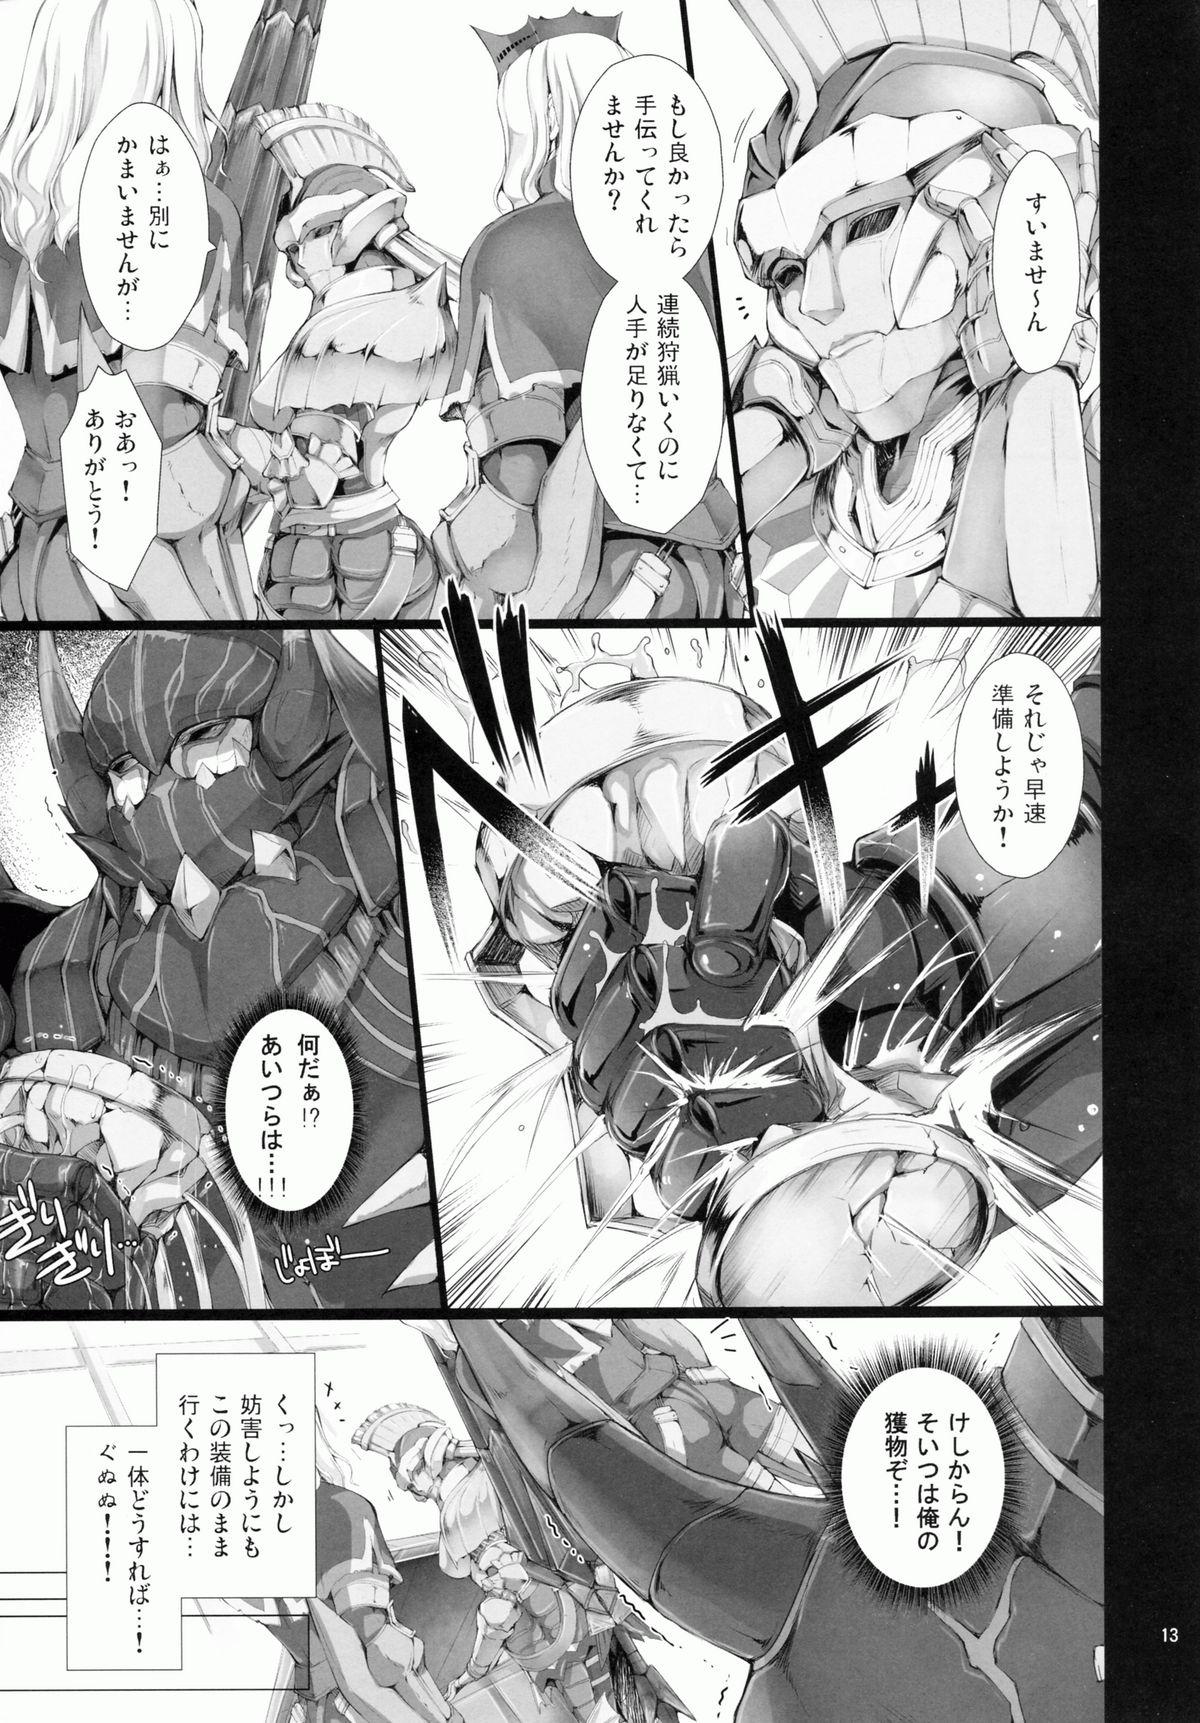 Sesso Monhan no Erohon 9 - Monster hunter Gay Shorthair - Page 13